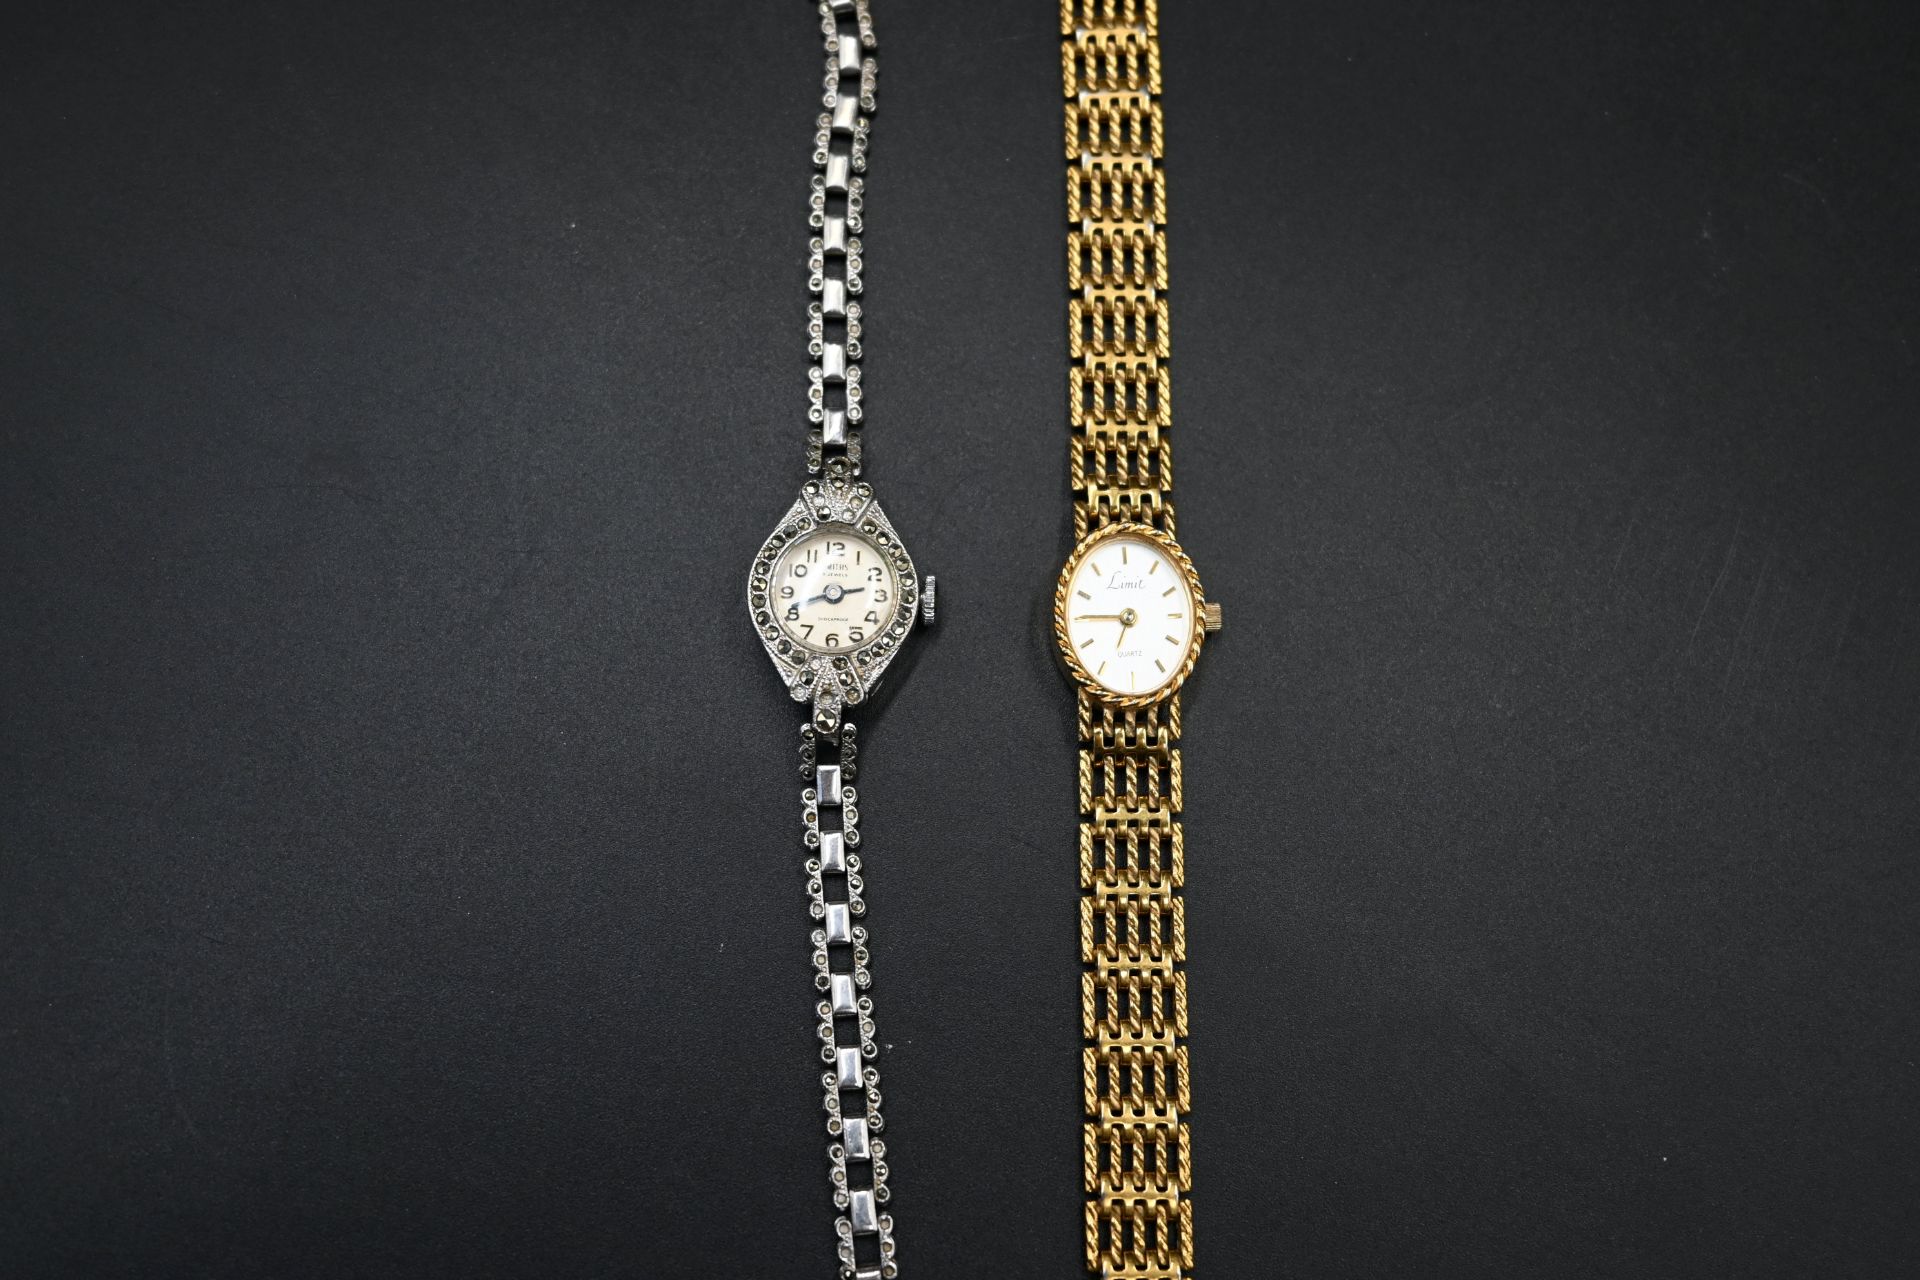 Smiths 5 jewels ladies marcasite art deco styly cocktail watch together with a Limit quartz watch